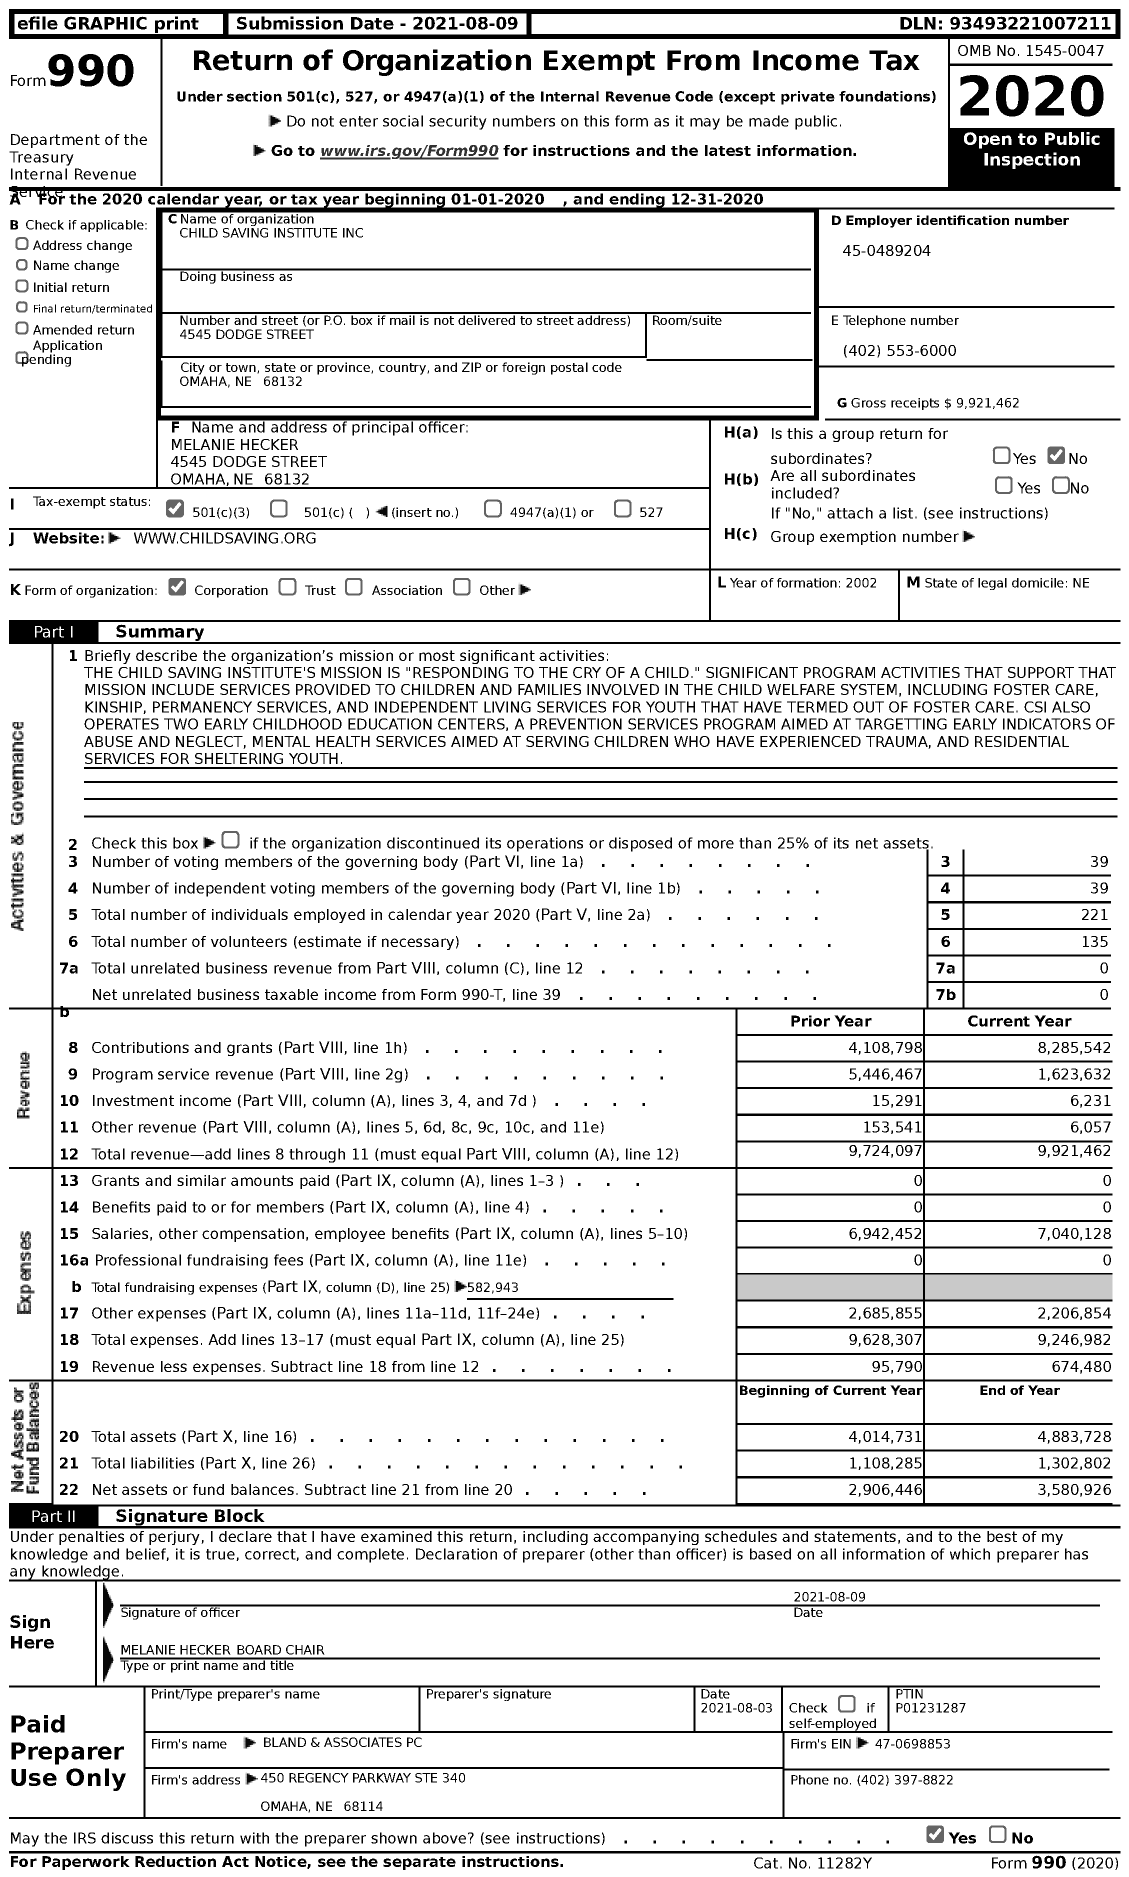 Image of first page of 2020 Form 990 for Child Saving Institute (CSI)